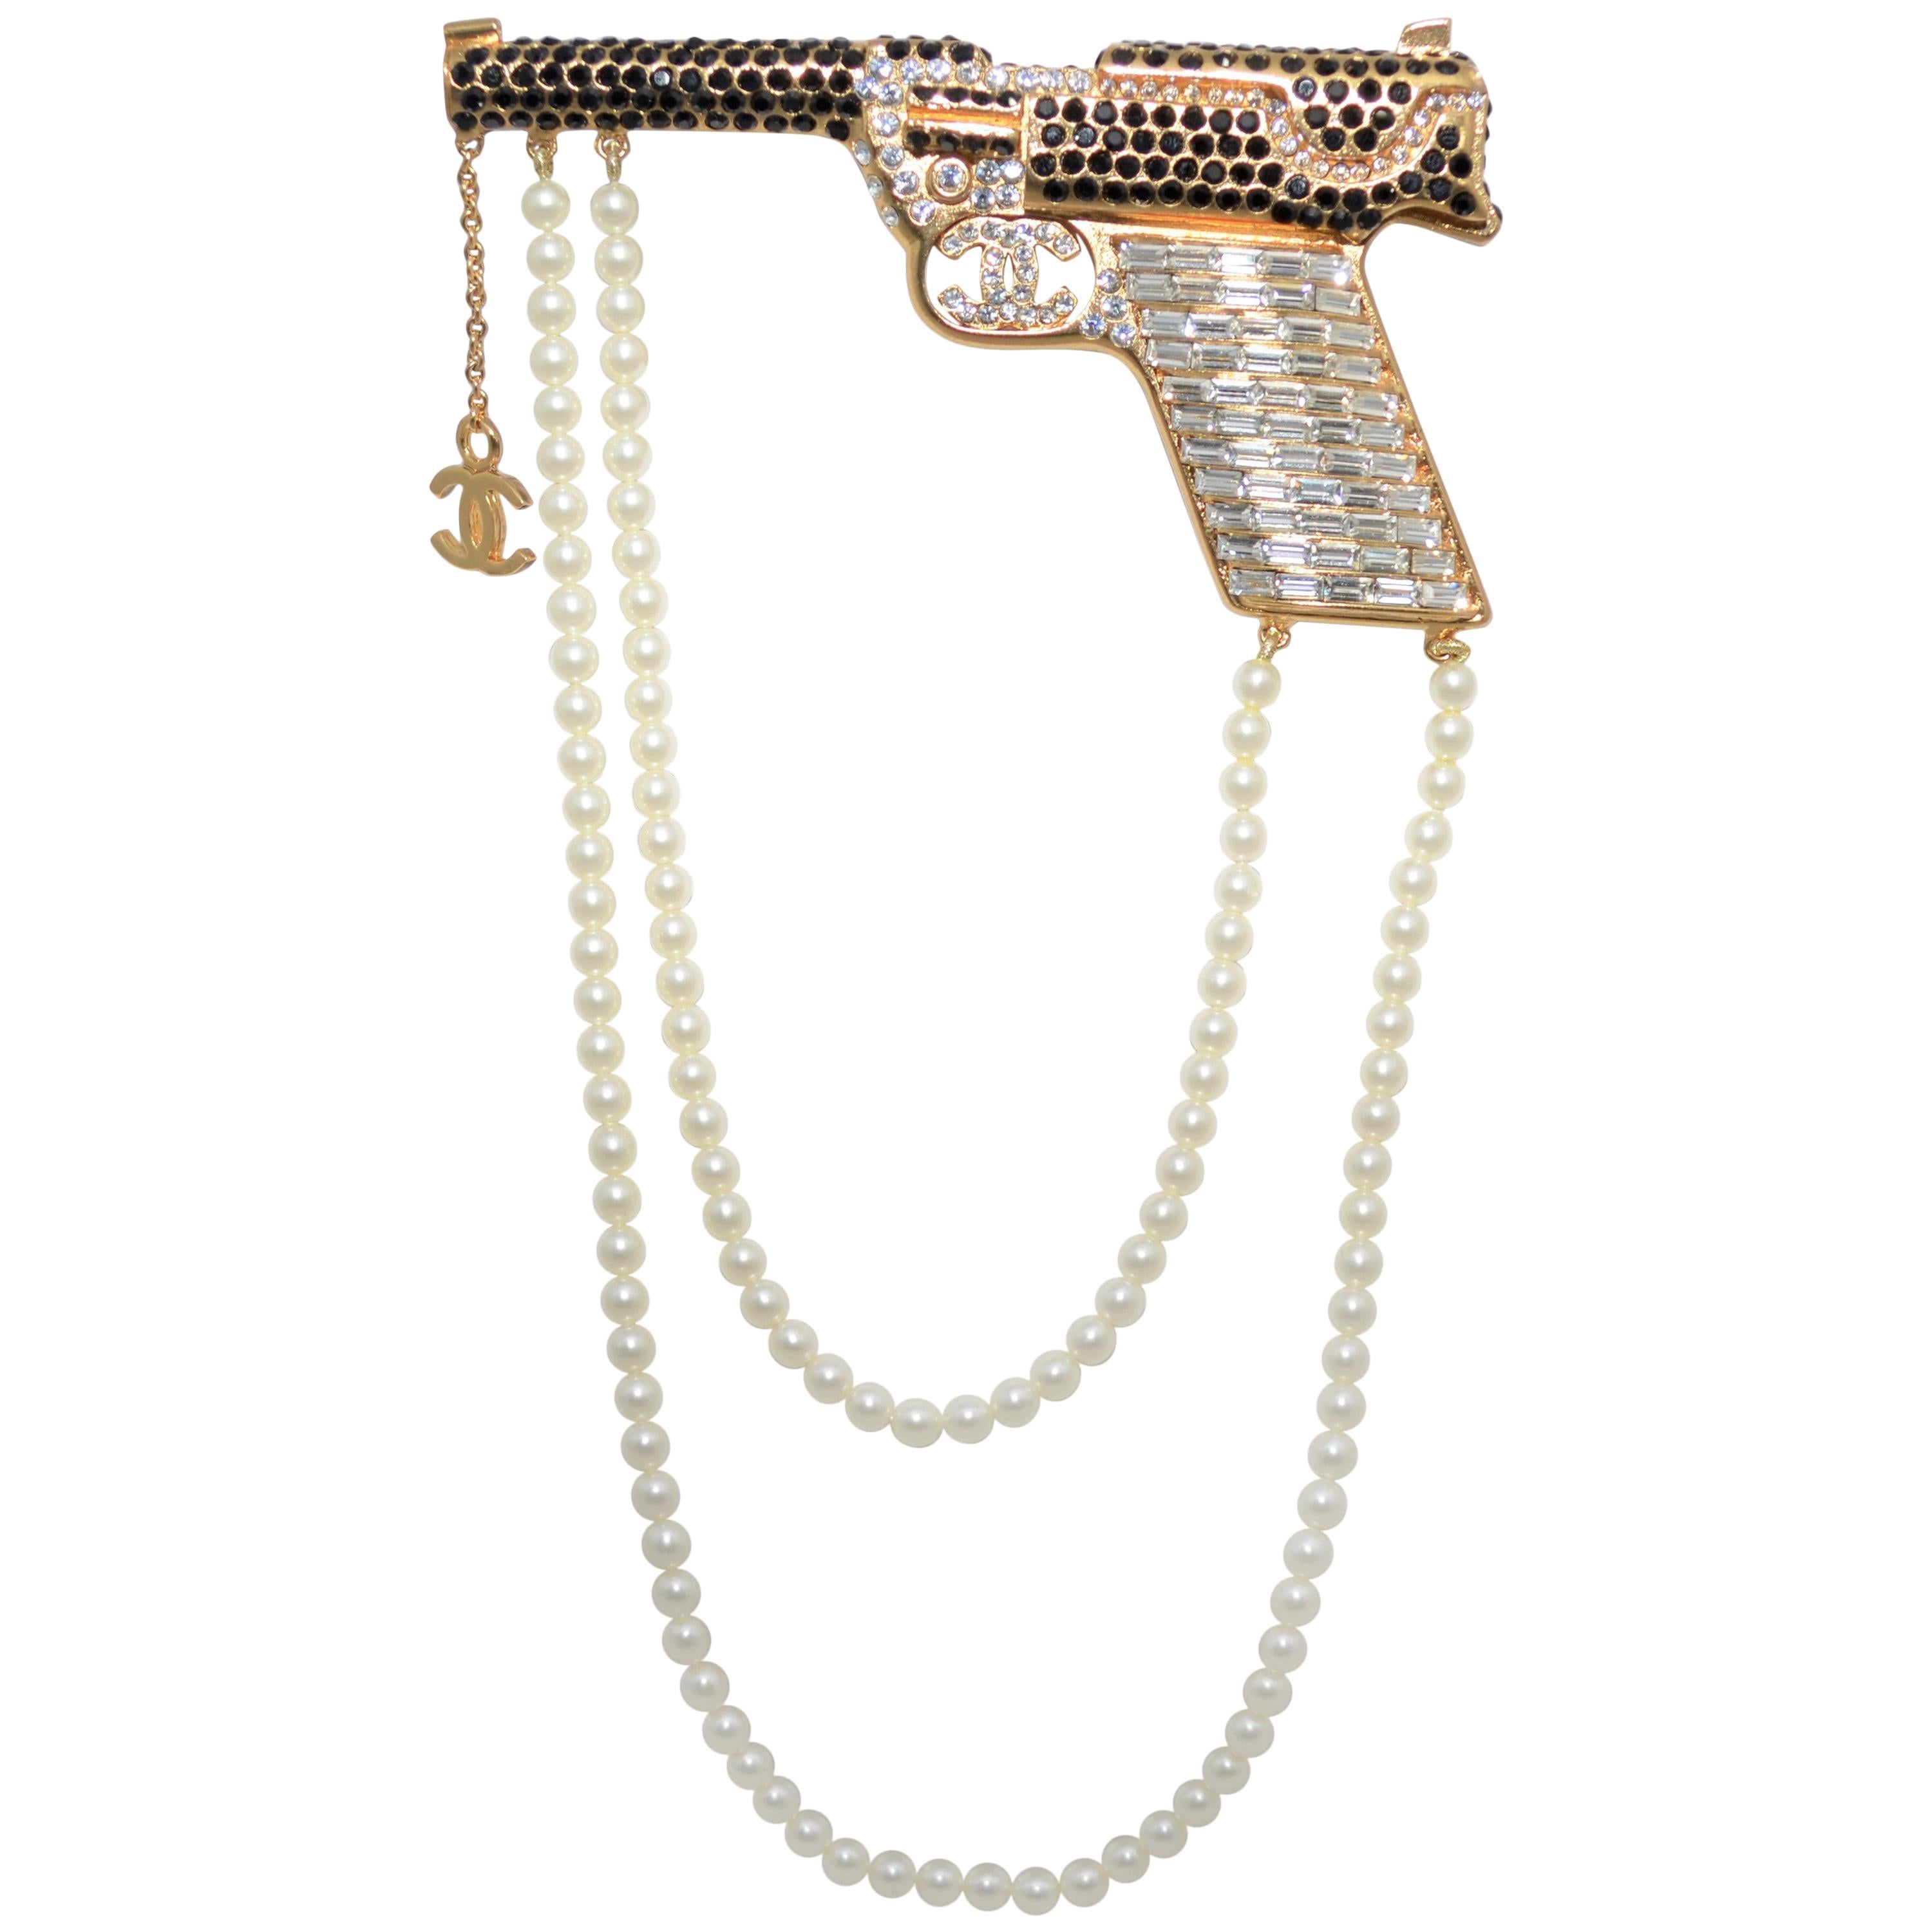 2001 A Chanel Gun Brooch Pin with Rhinestones and Pearls